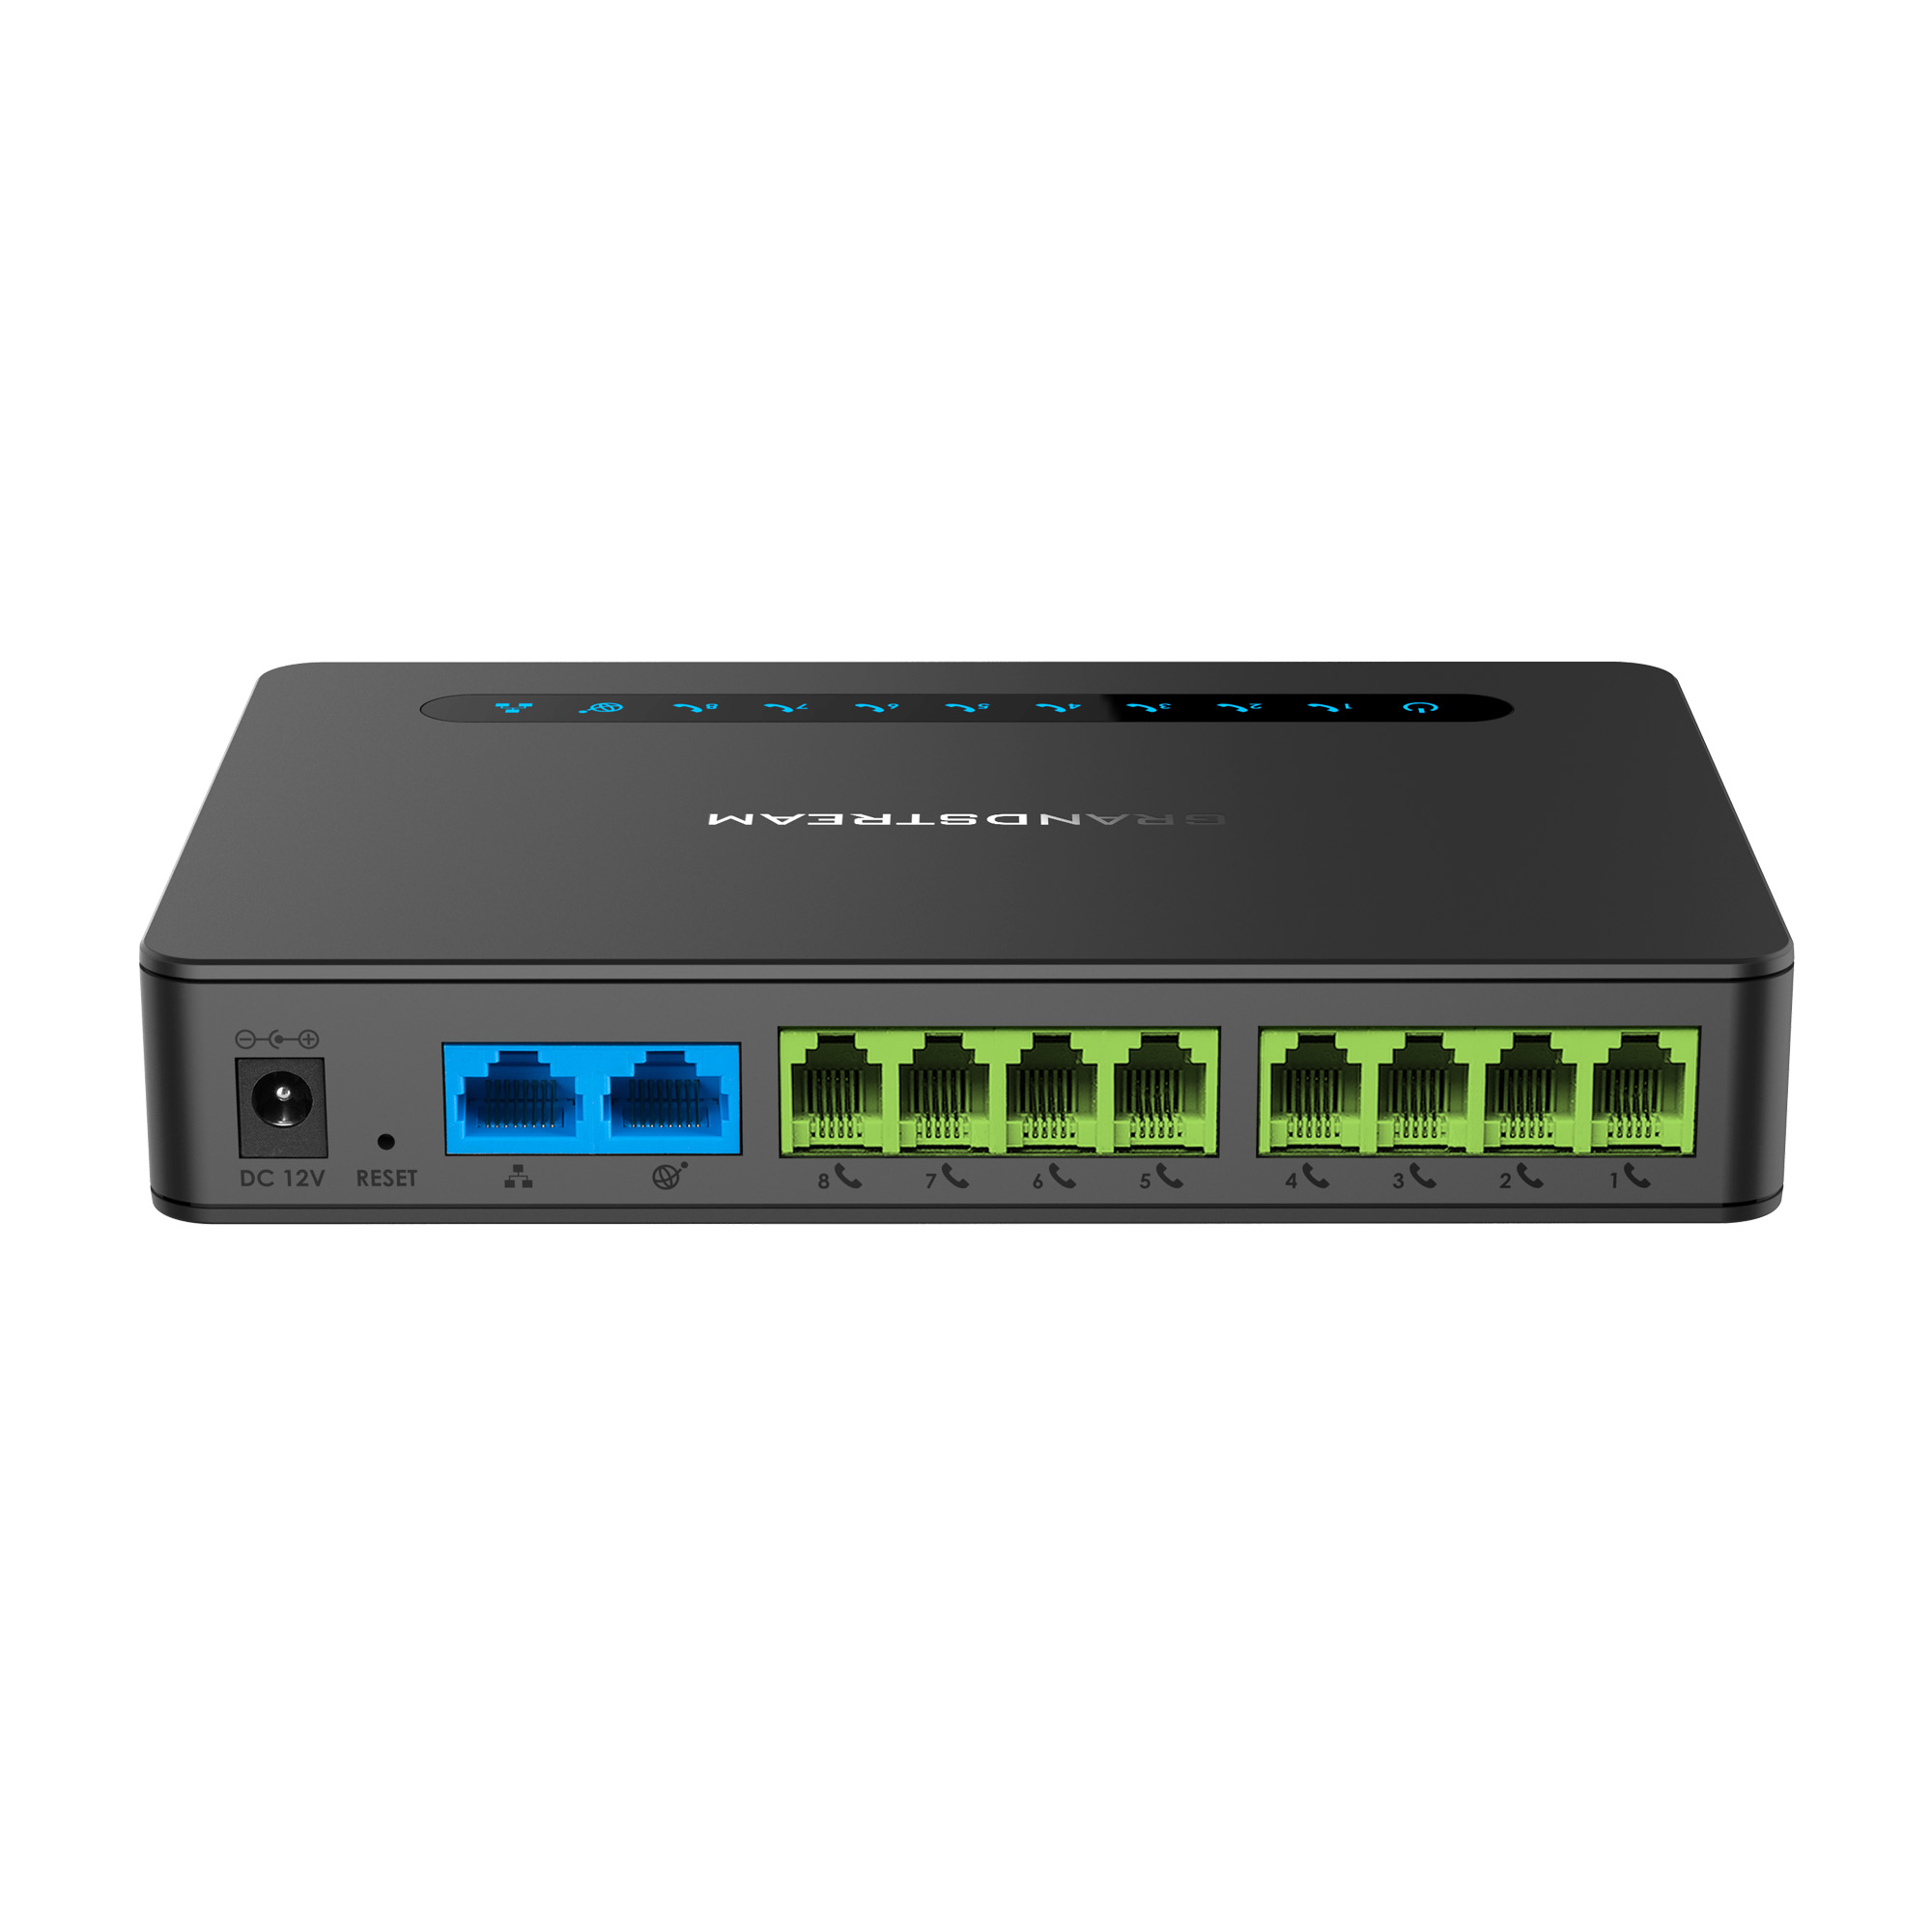 image of back 8 Port FXS Gateway with Gigabit NAT Router ATA for business communication